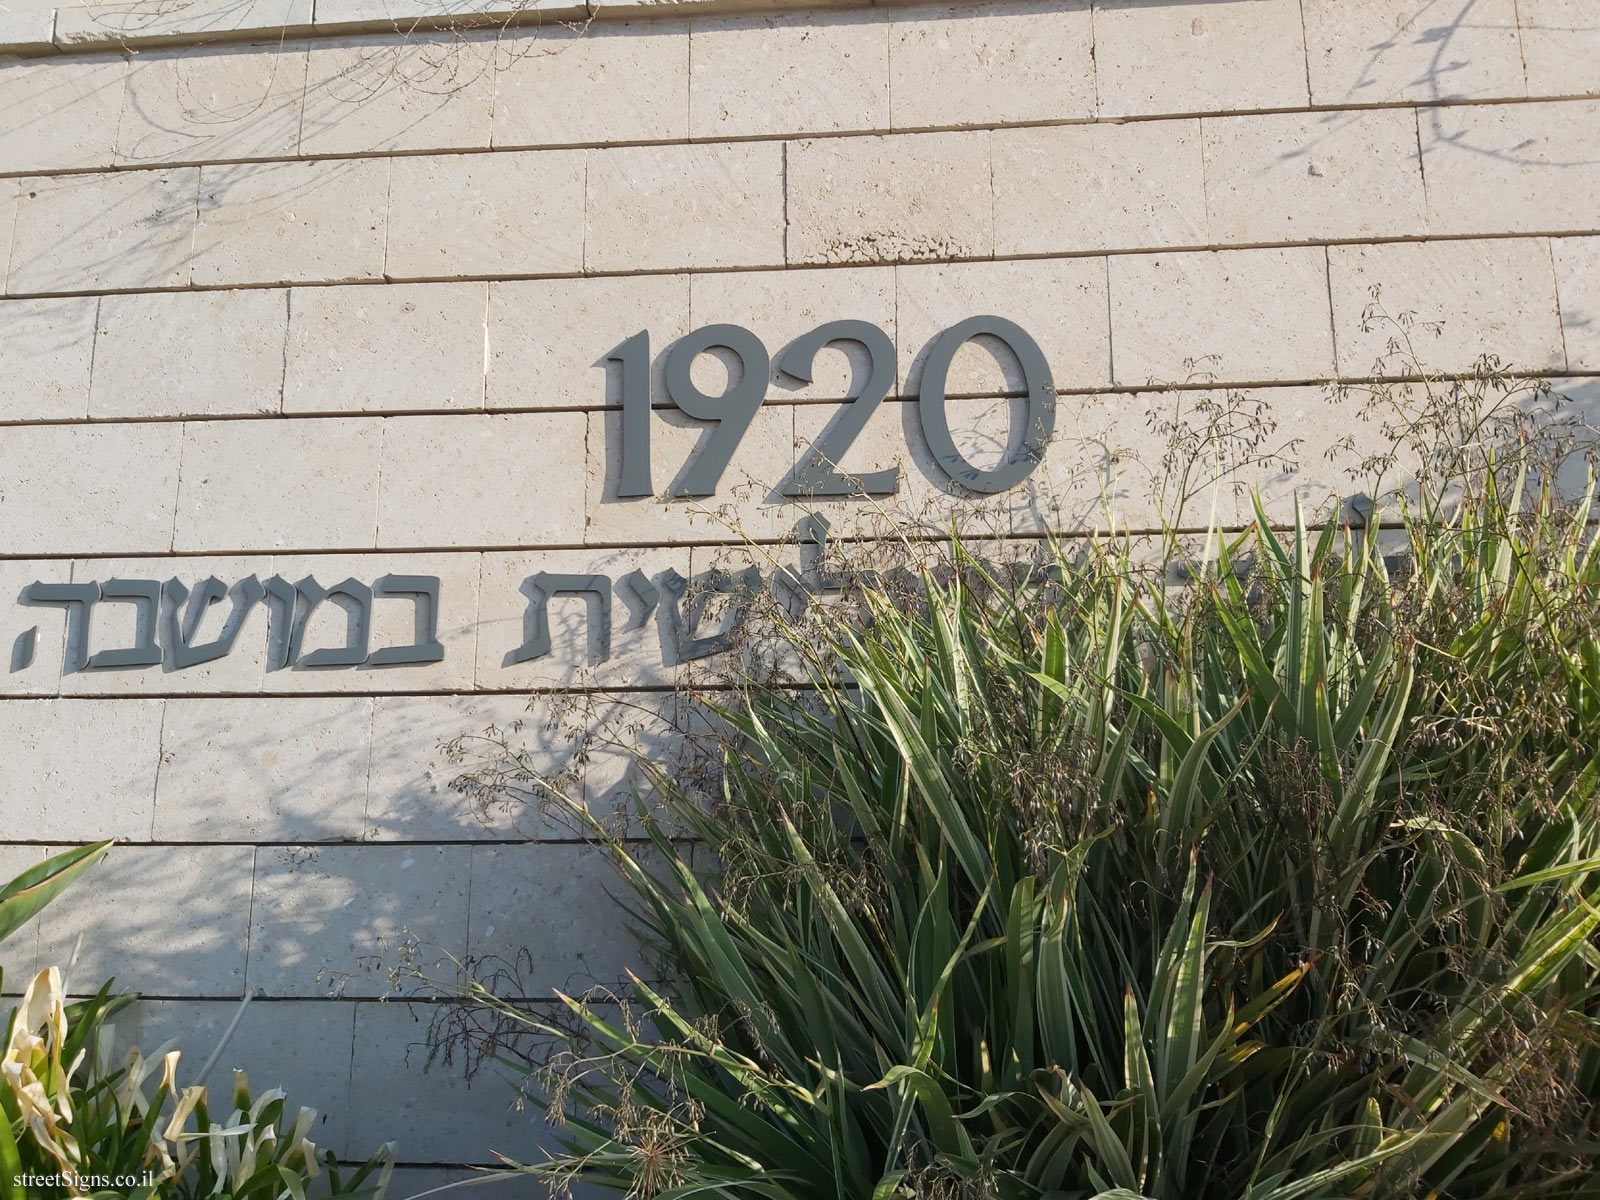 Gedera - The historic wall - 1920 - The Third Aliyah in the colony